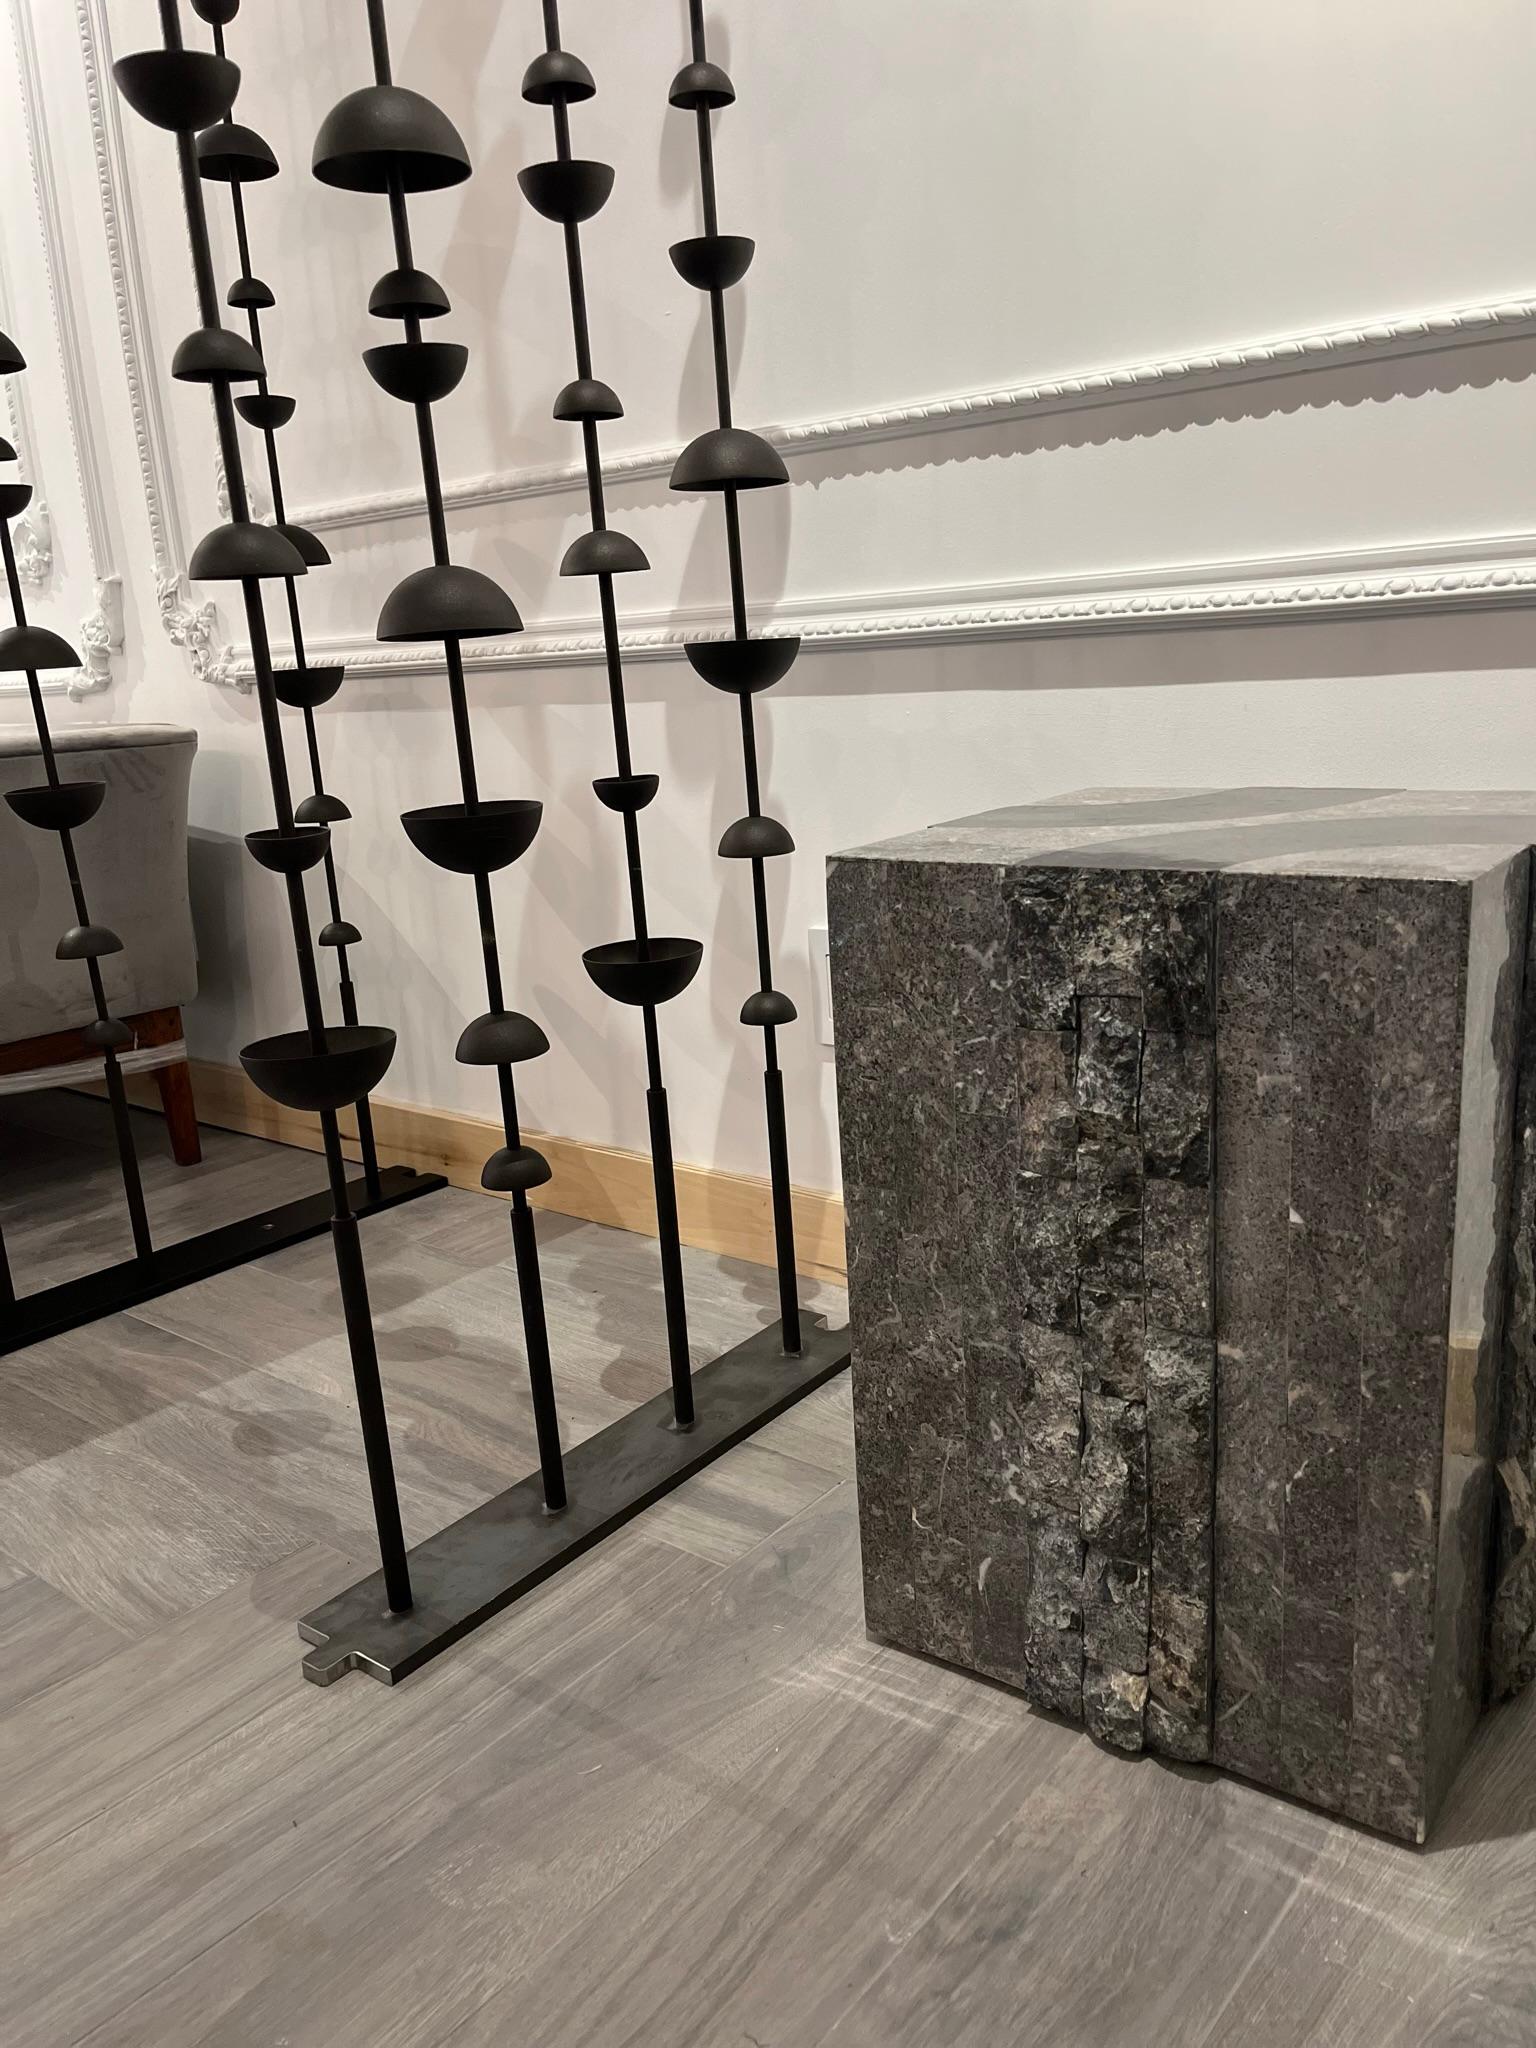 Anodized Aluminium Sculptural Room Divider / Sculpture In New Condition For Sale In toronto, CA